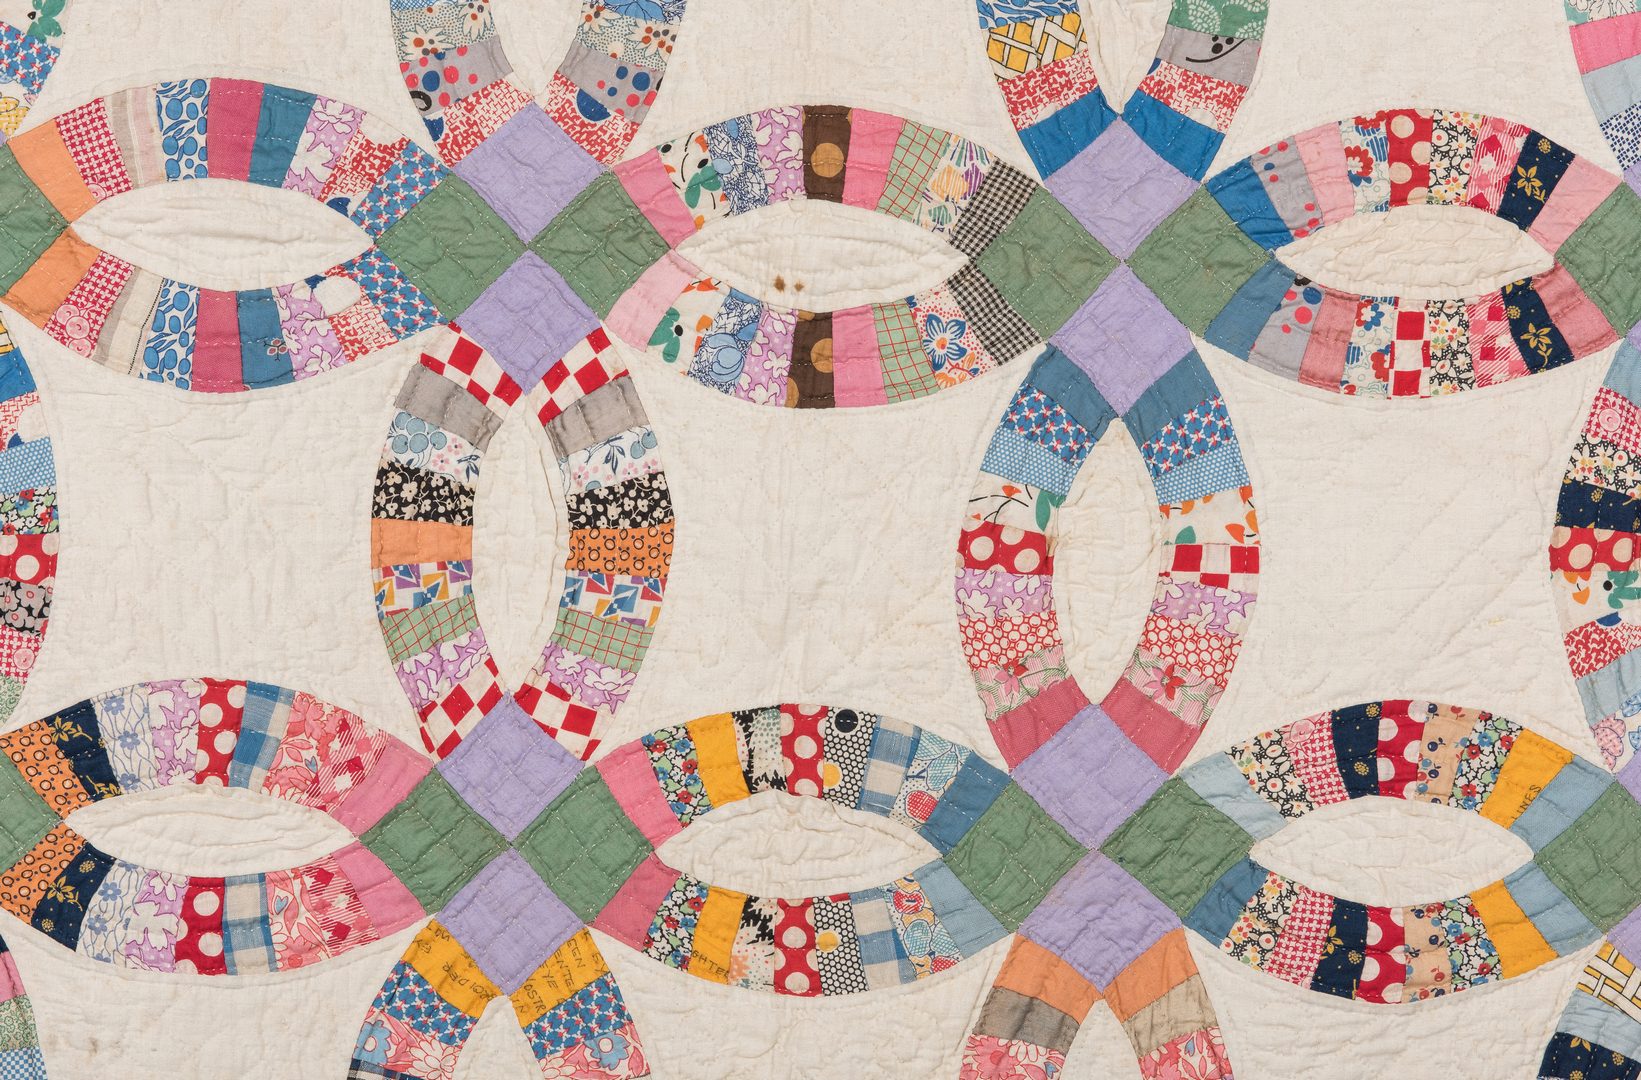 Lot 340: 3 American Quilts, Early 20th C. including Crazy Quilt